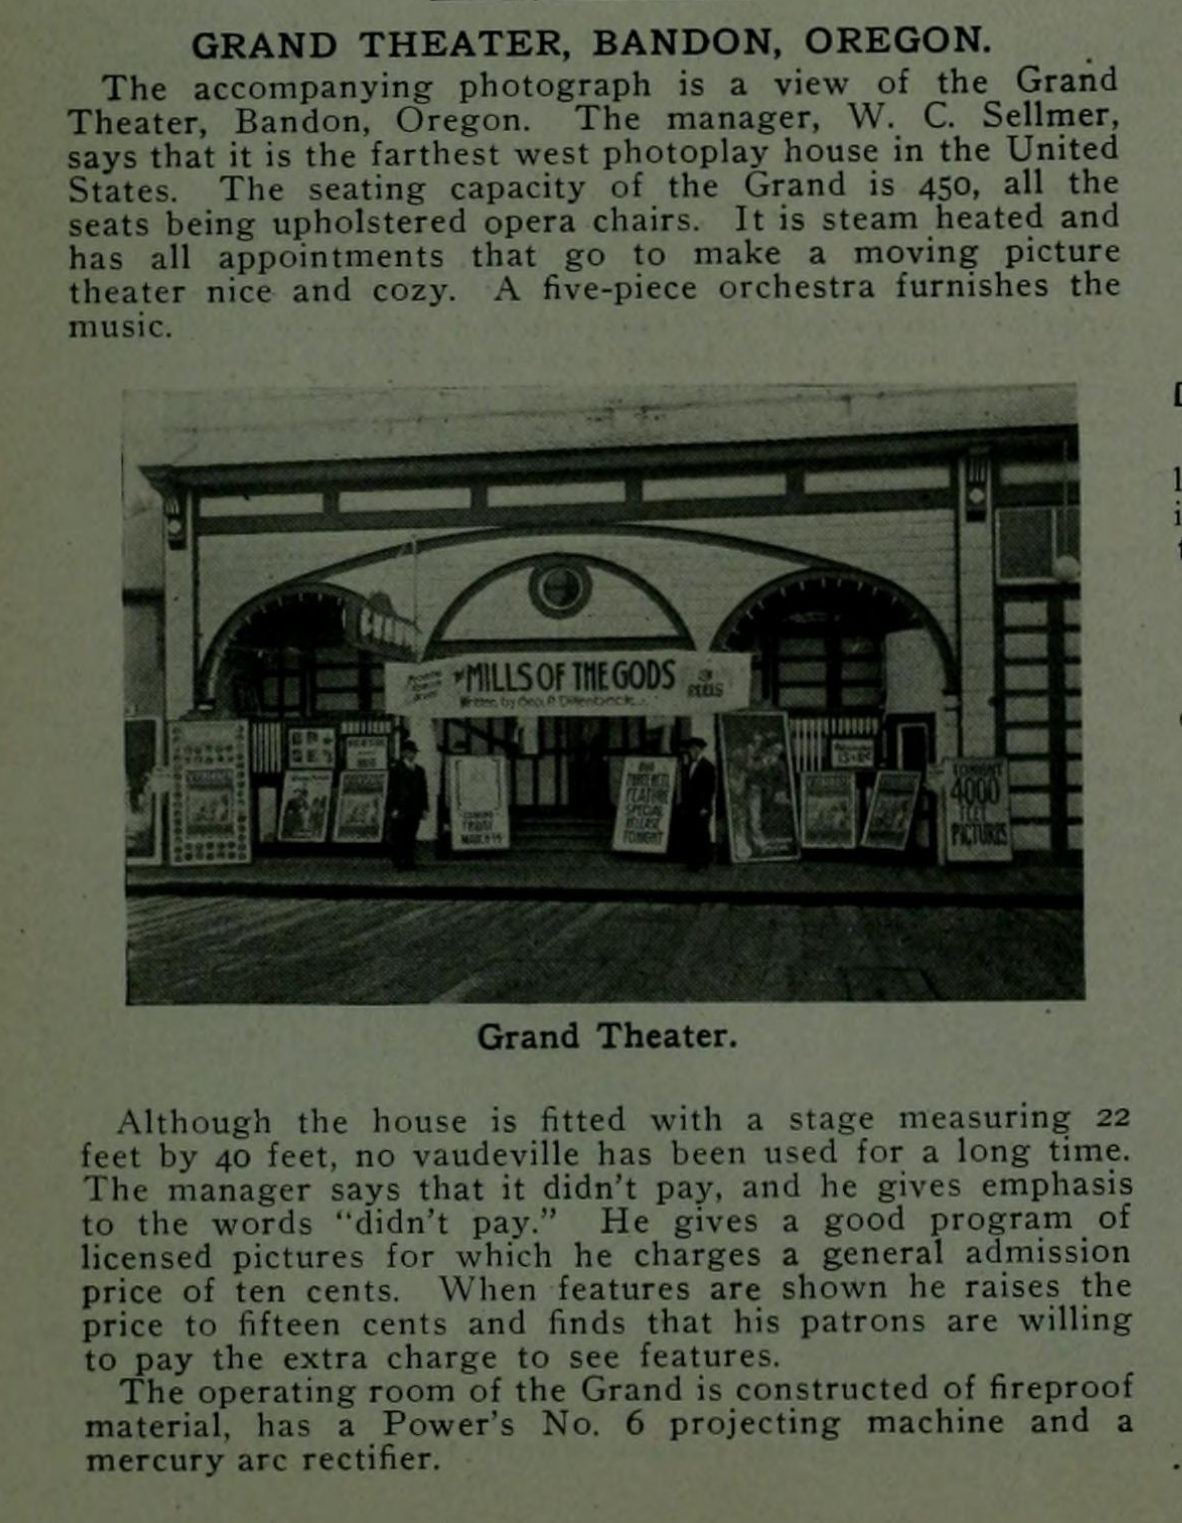 Moving Picture World, Jun. 7, 1913, p. 1016. Media History Digital Library.